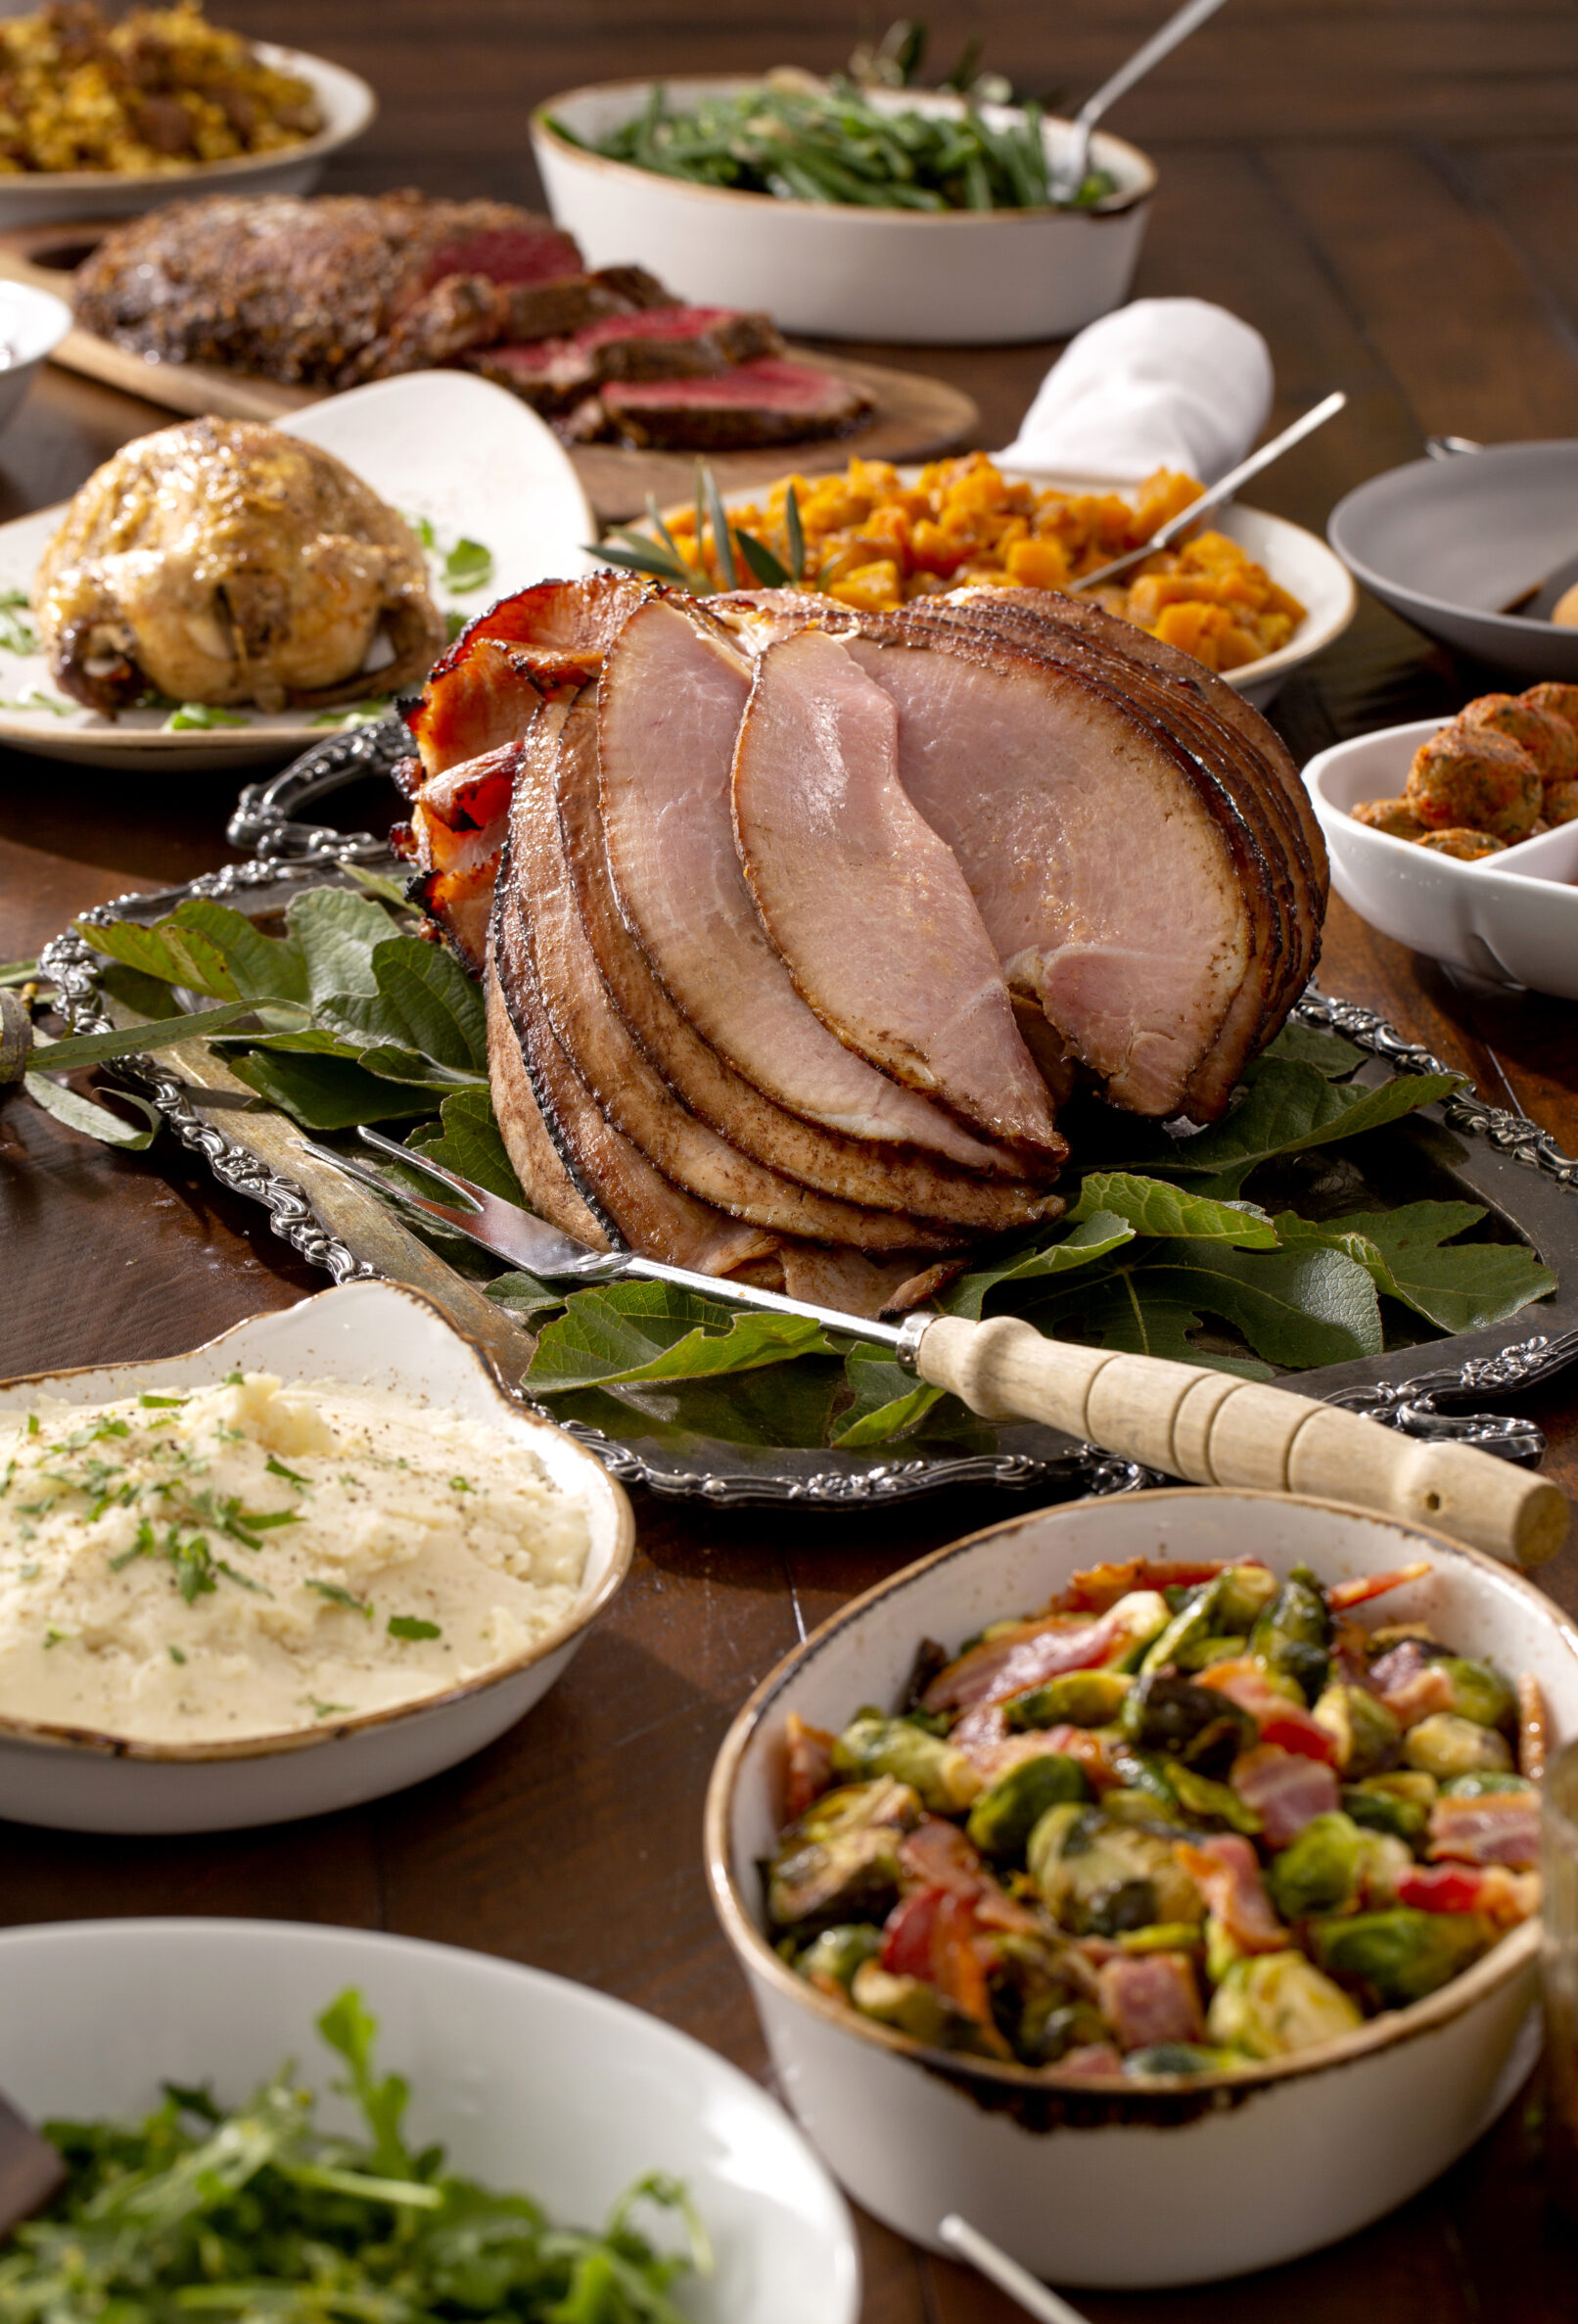 Photo of a Thanksgiving tablescape with ham, salad, green beans, mashed potatoes and other traditional foods.